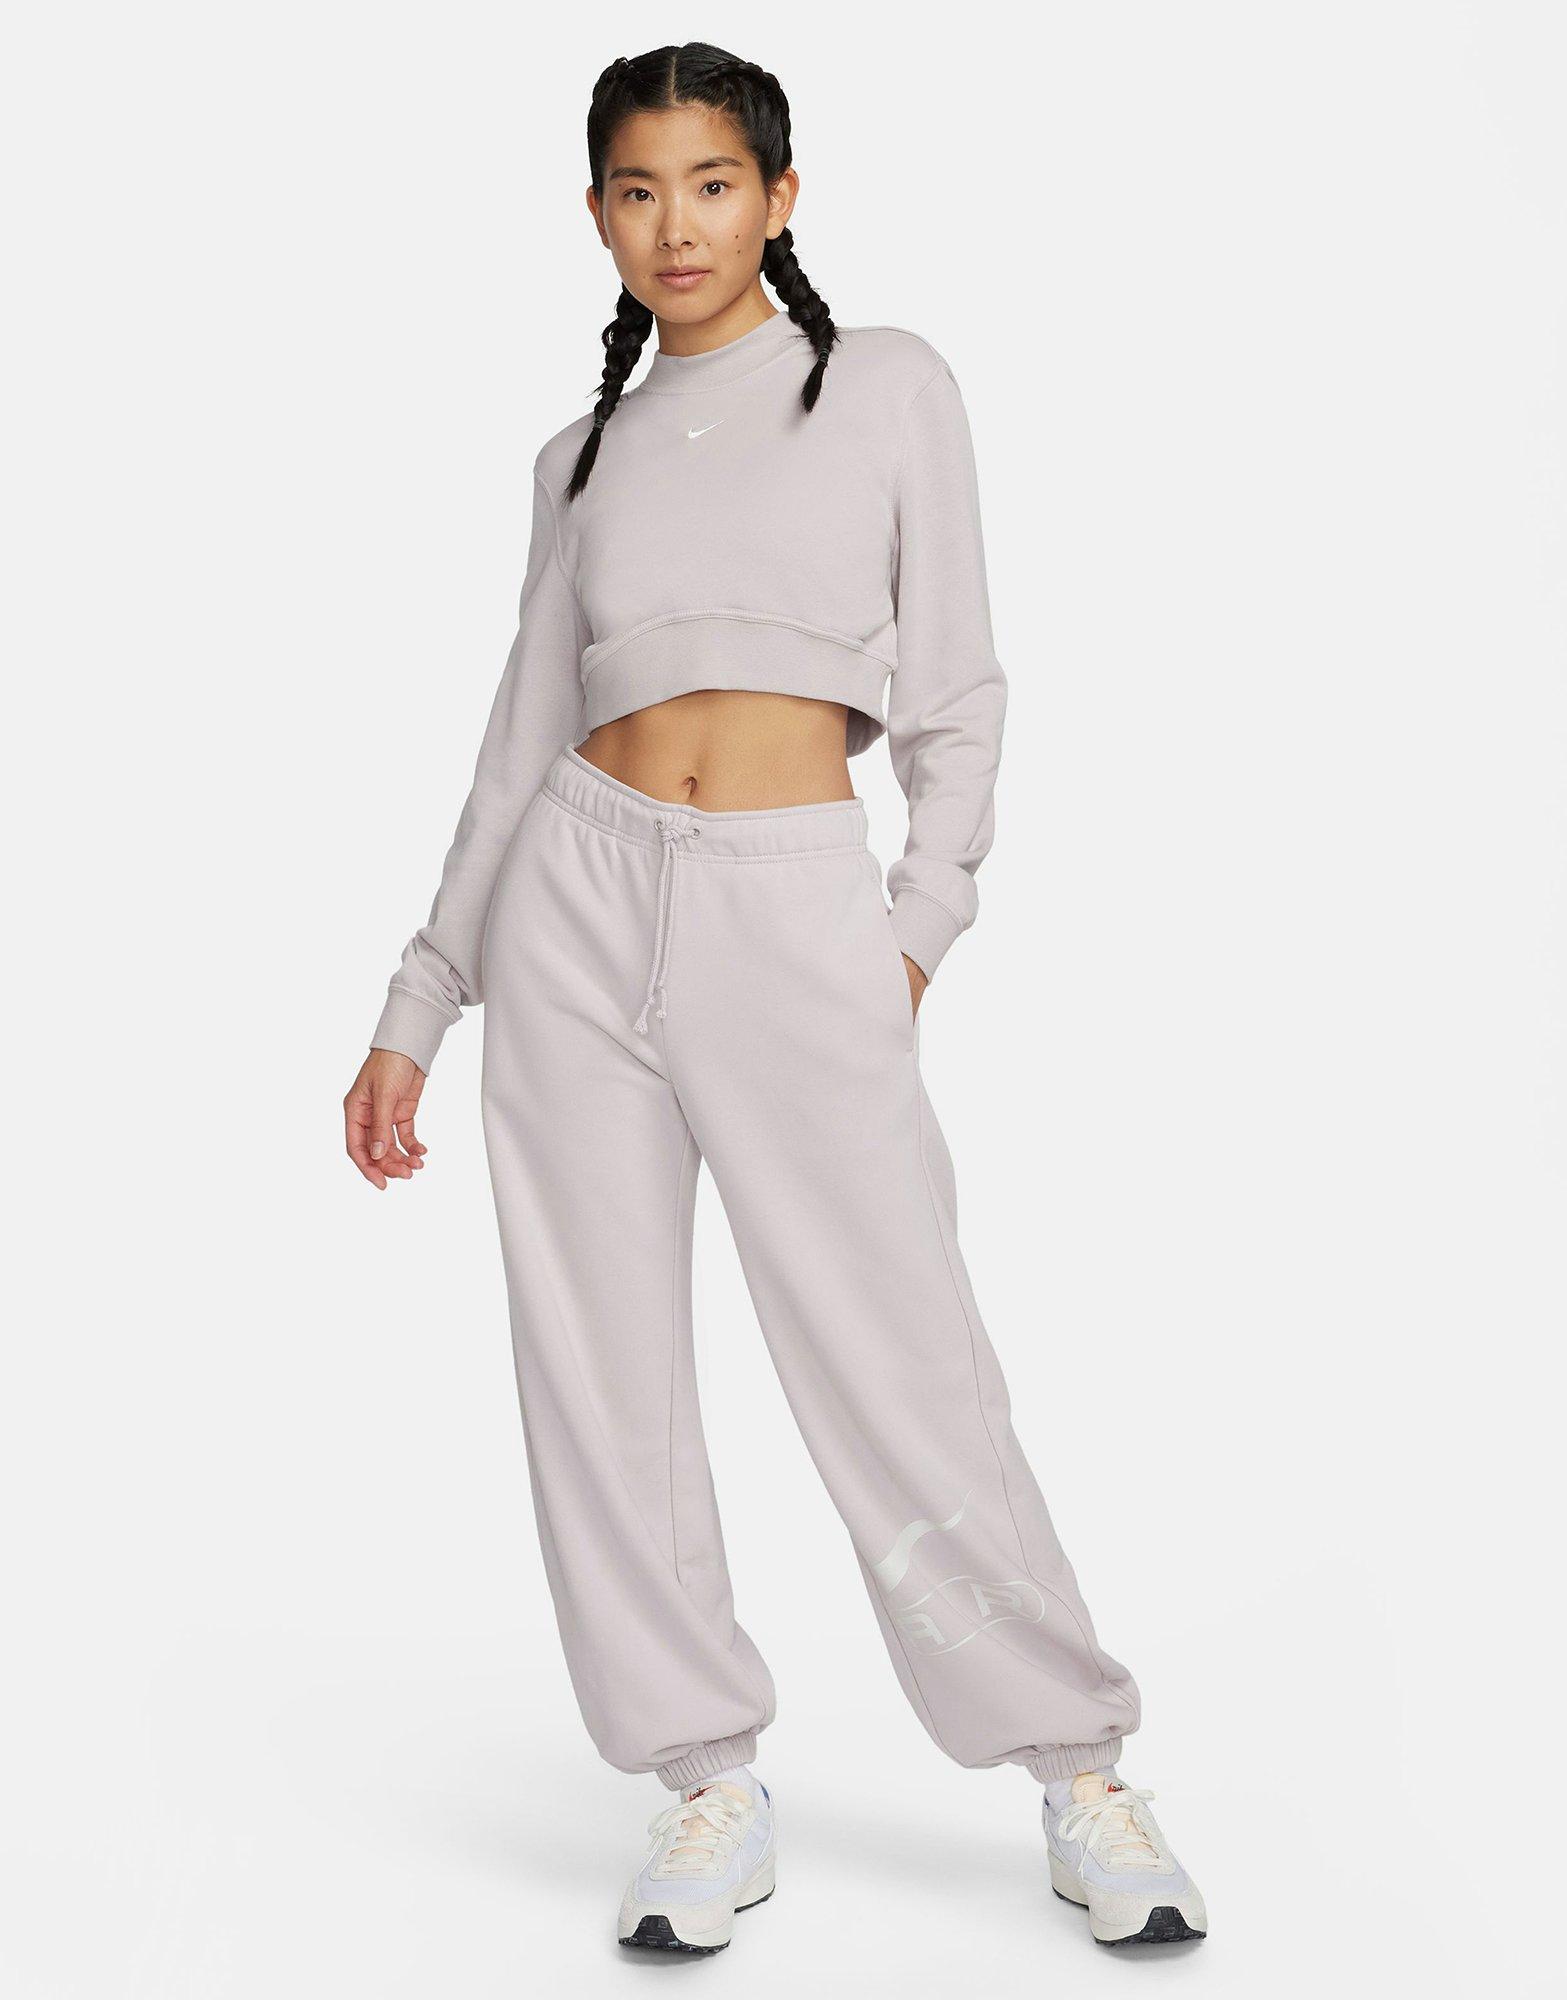 Women's Crop top and jogger set NWT